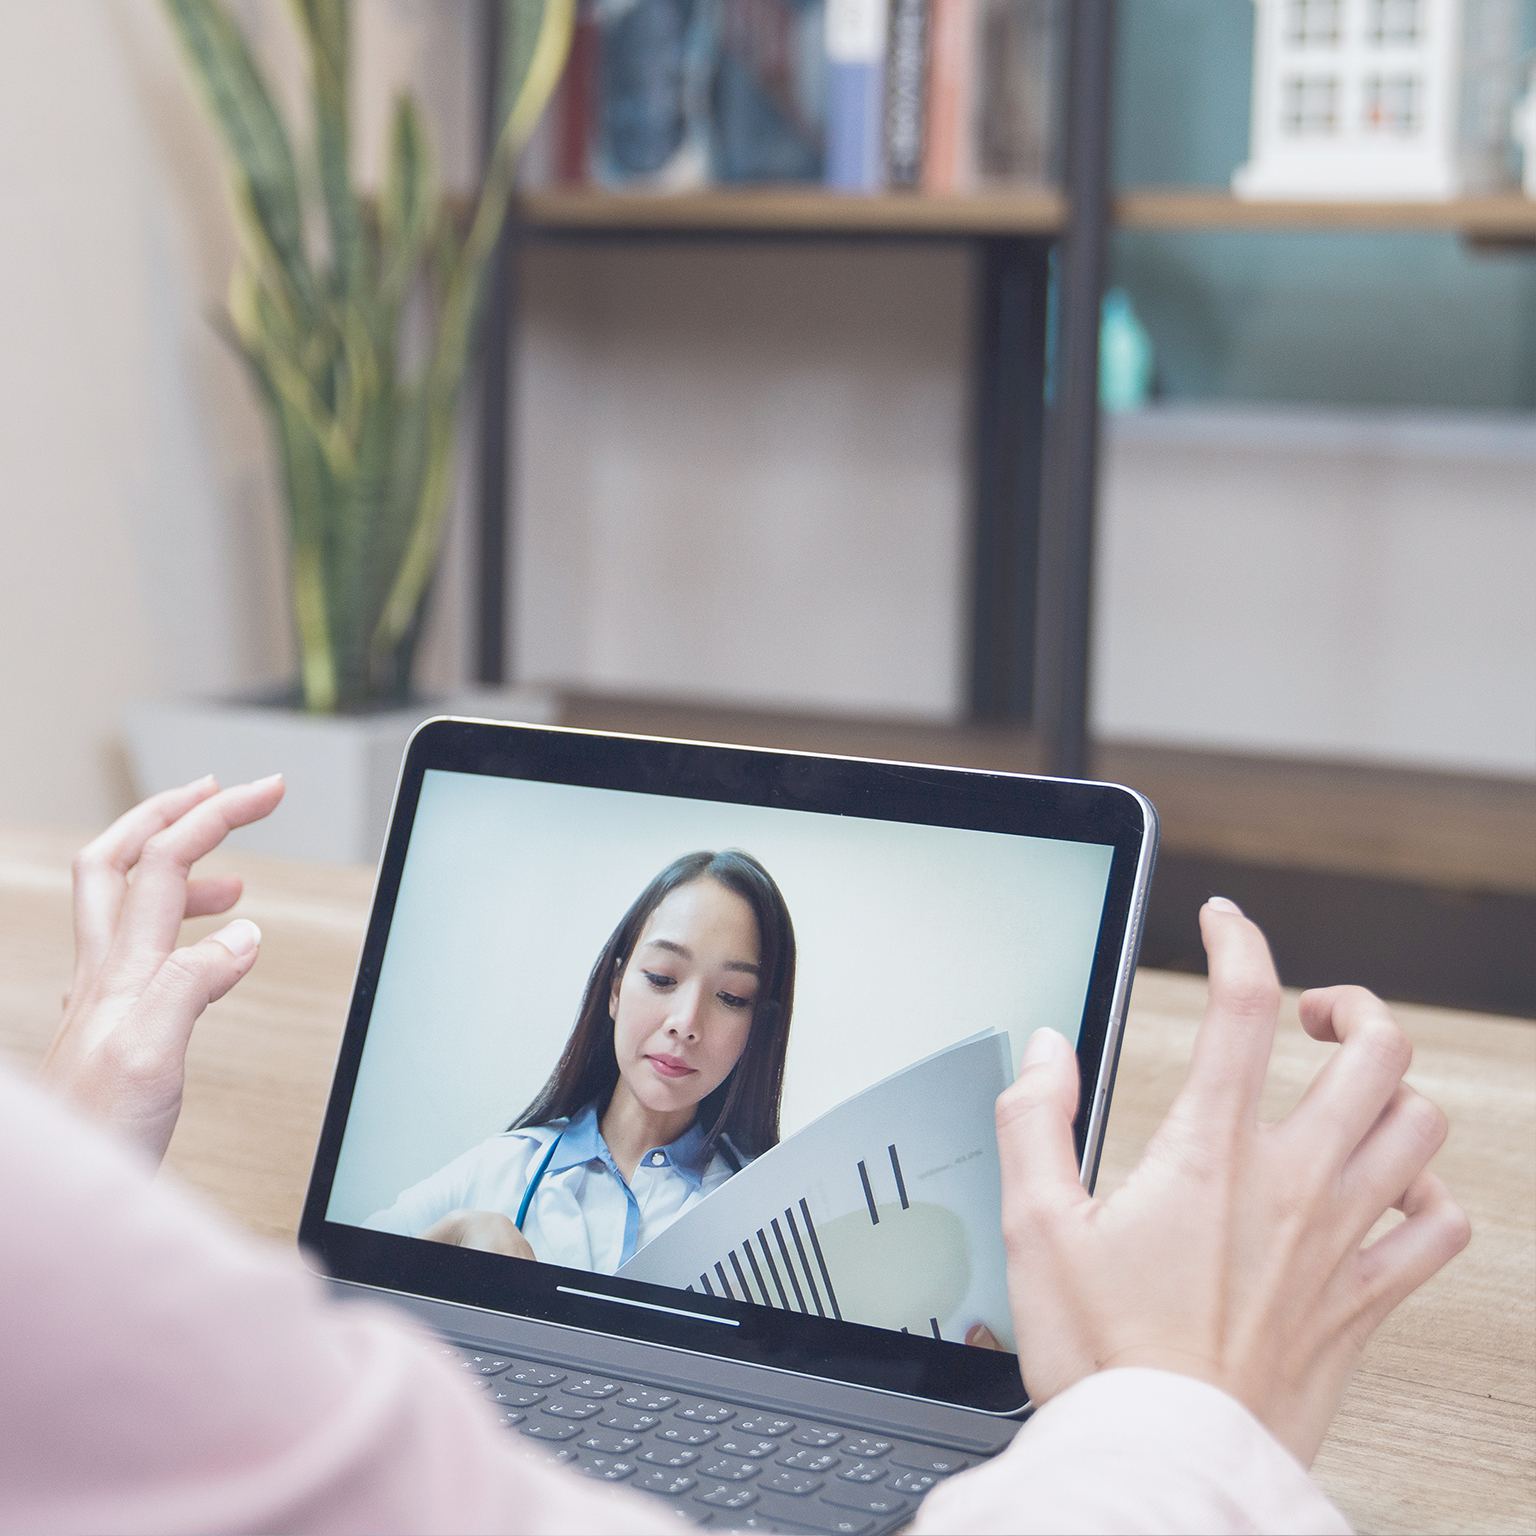 Virtual health: A Look at the Next Frontier of Care Delivery